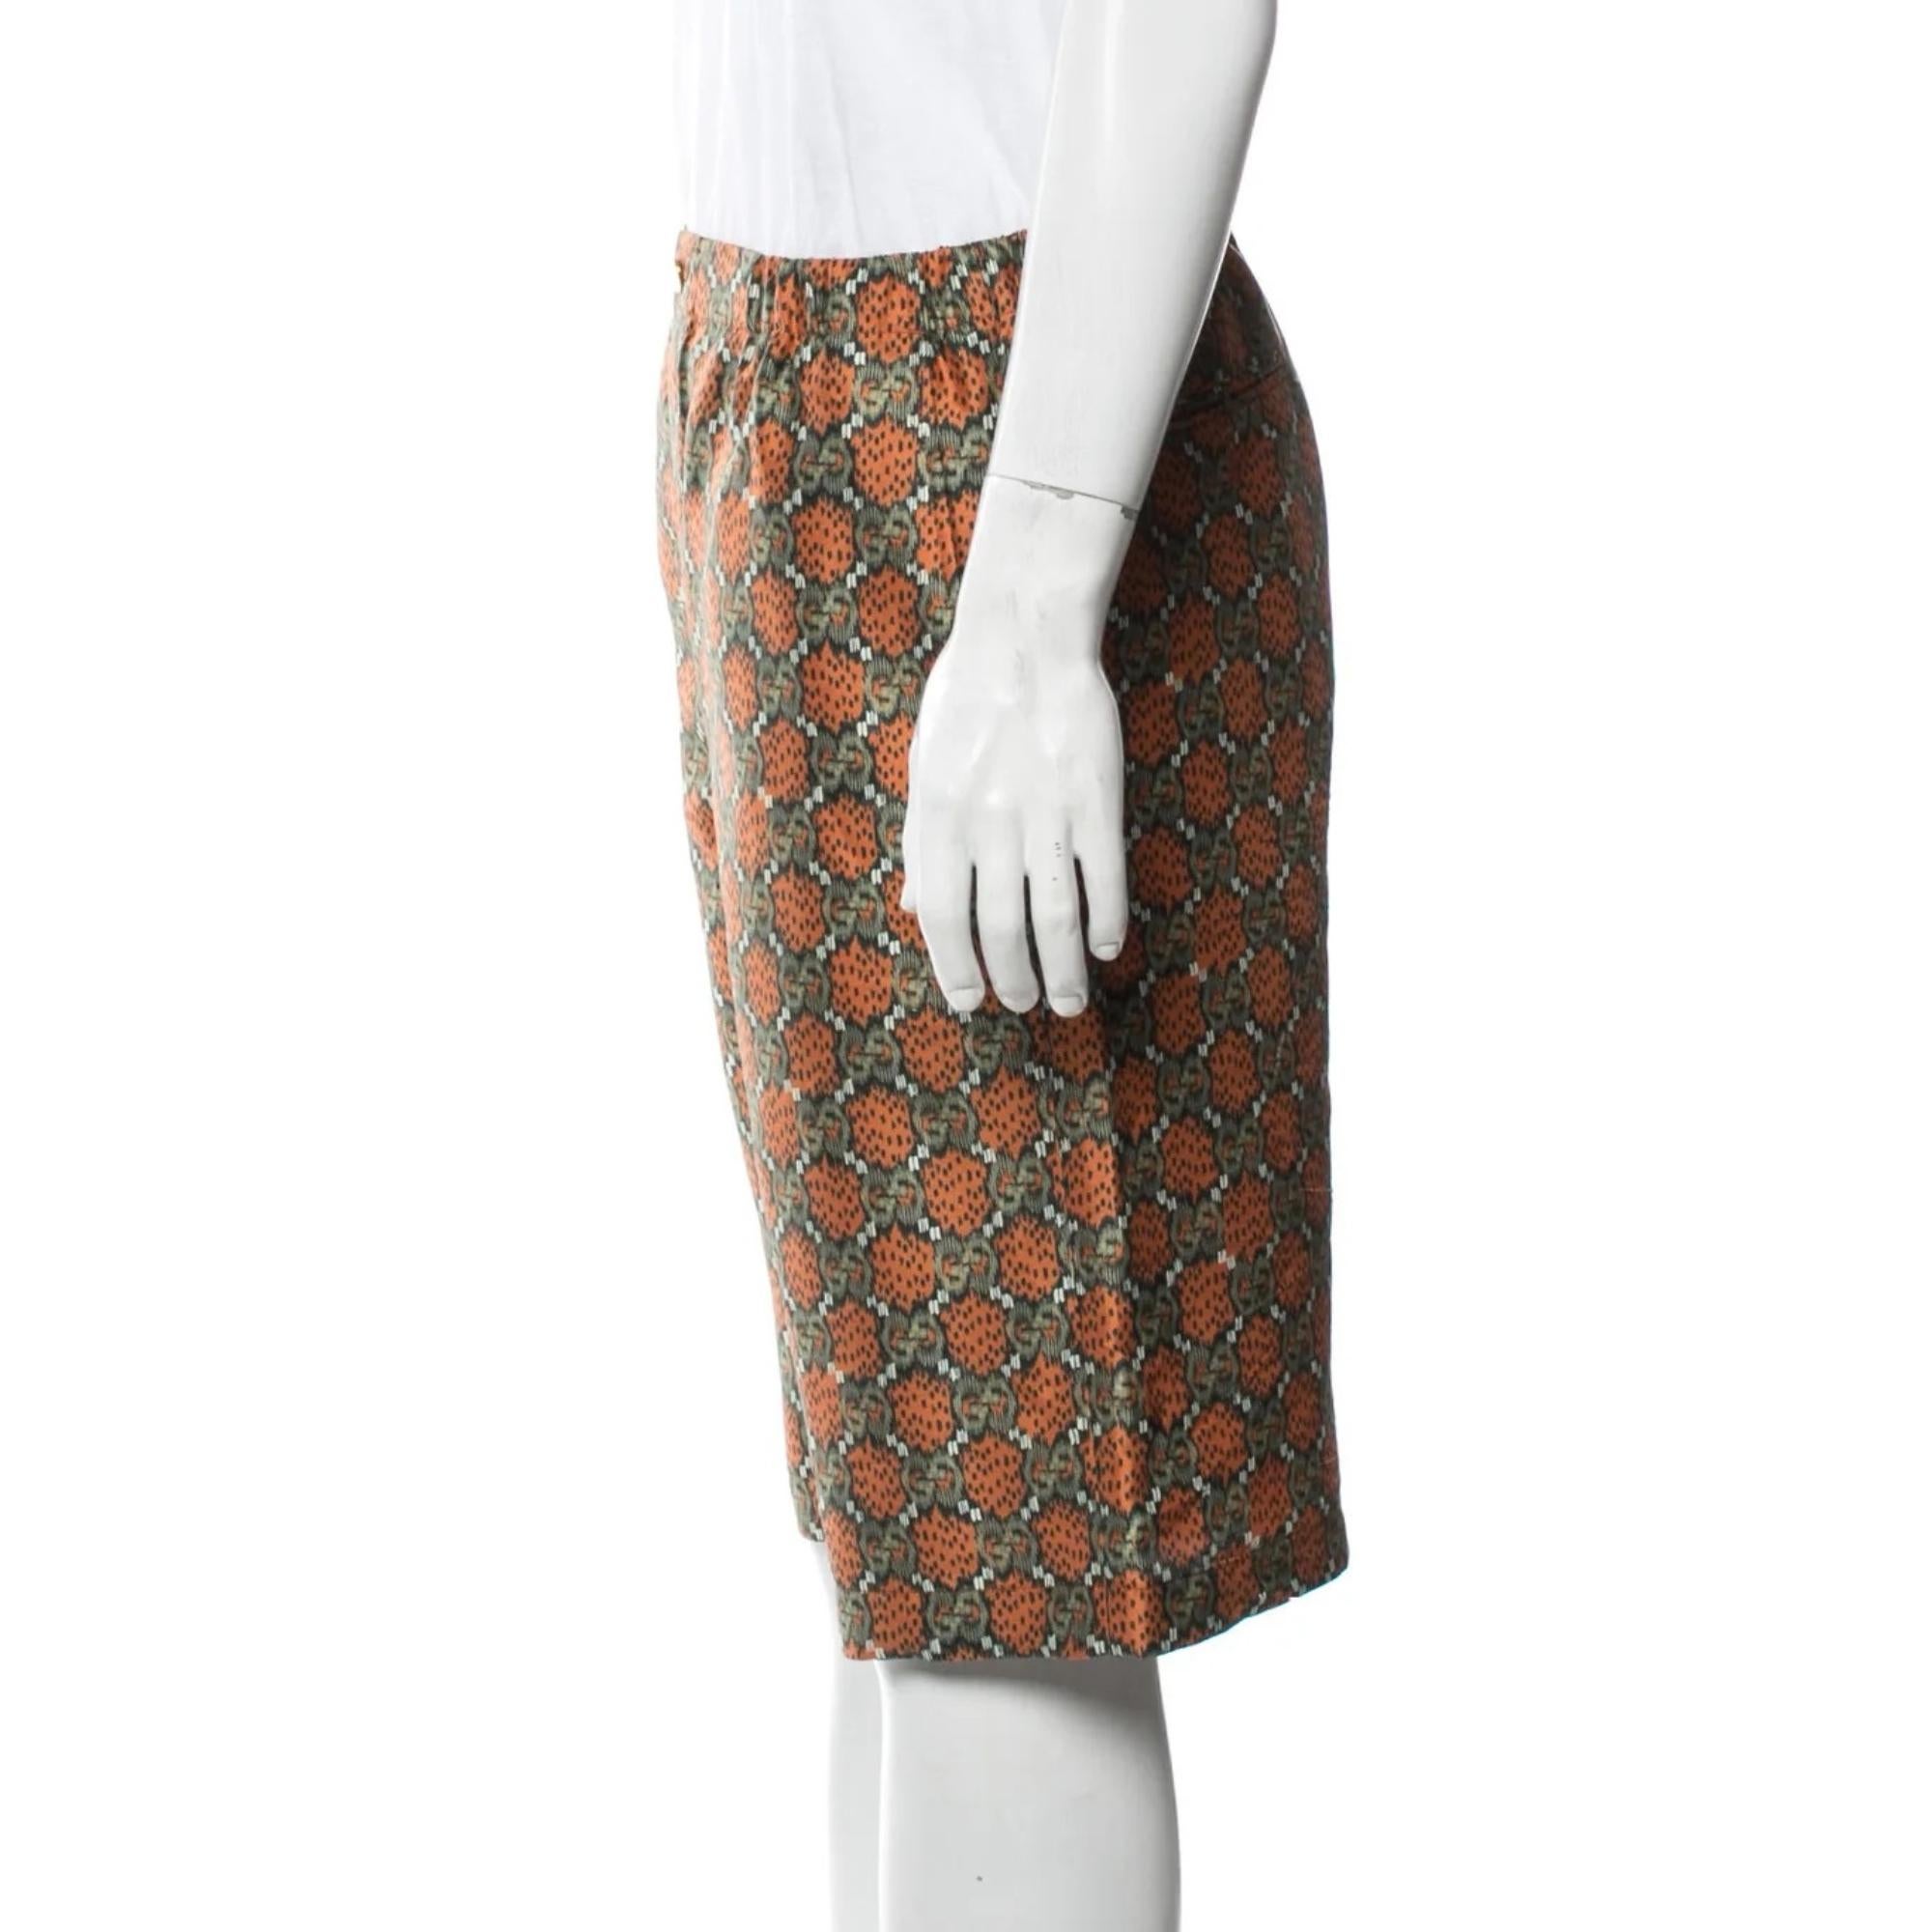 Gucci Silk Flat Front Shorts. From the Spring/Summer 2020 Collection by Alessandro Michele. Orange. GG Logo. Slit Pockets & Button Closure. “noisy tie on shantung orange/ beige prt” 623159

Color: Orange
Material: Synthetic
Item code: 623159